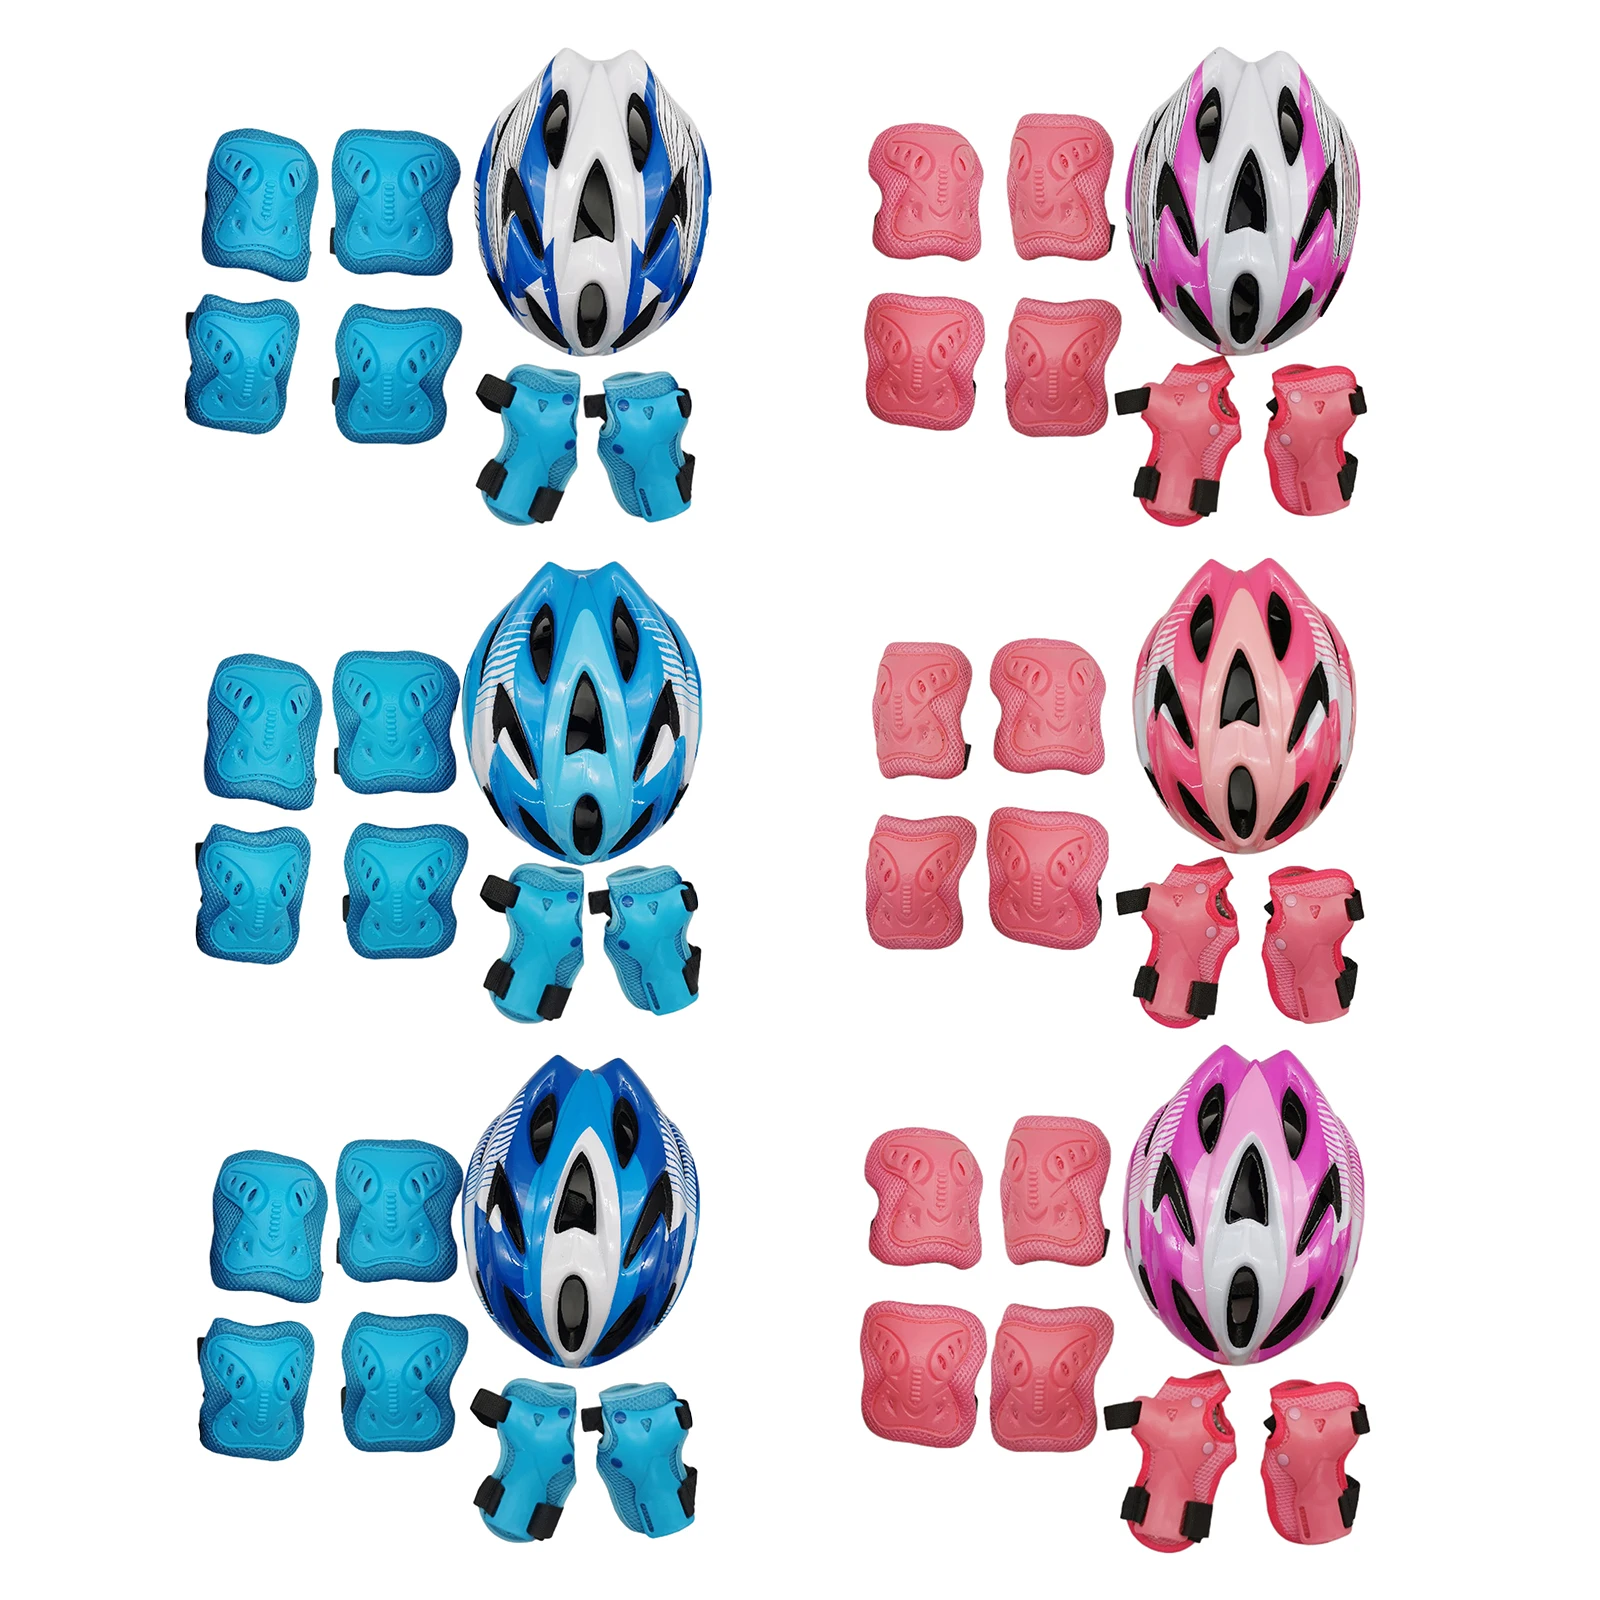 Complete 7pcs Roller Skating Protector Elbow Knee Pads Helmet Kids Riding Skateboard Ice Sports Wrist Guard Protective Gear Set